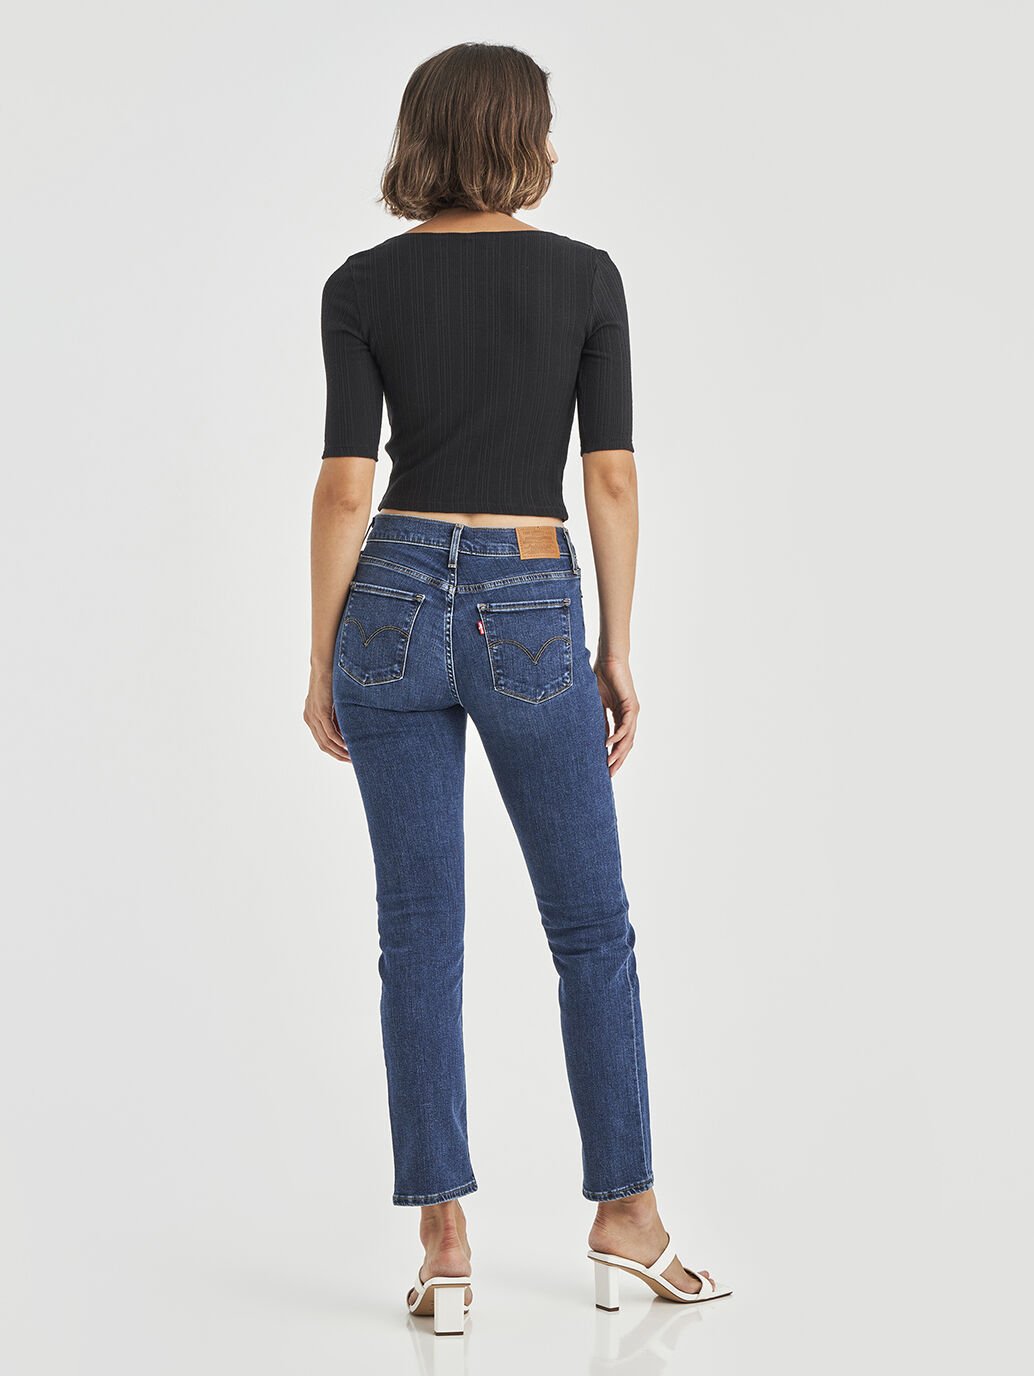 Levi's Women's 314 Shaping Straight Jeans - Soft Black